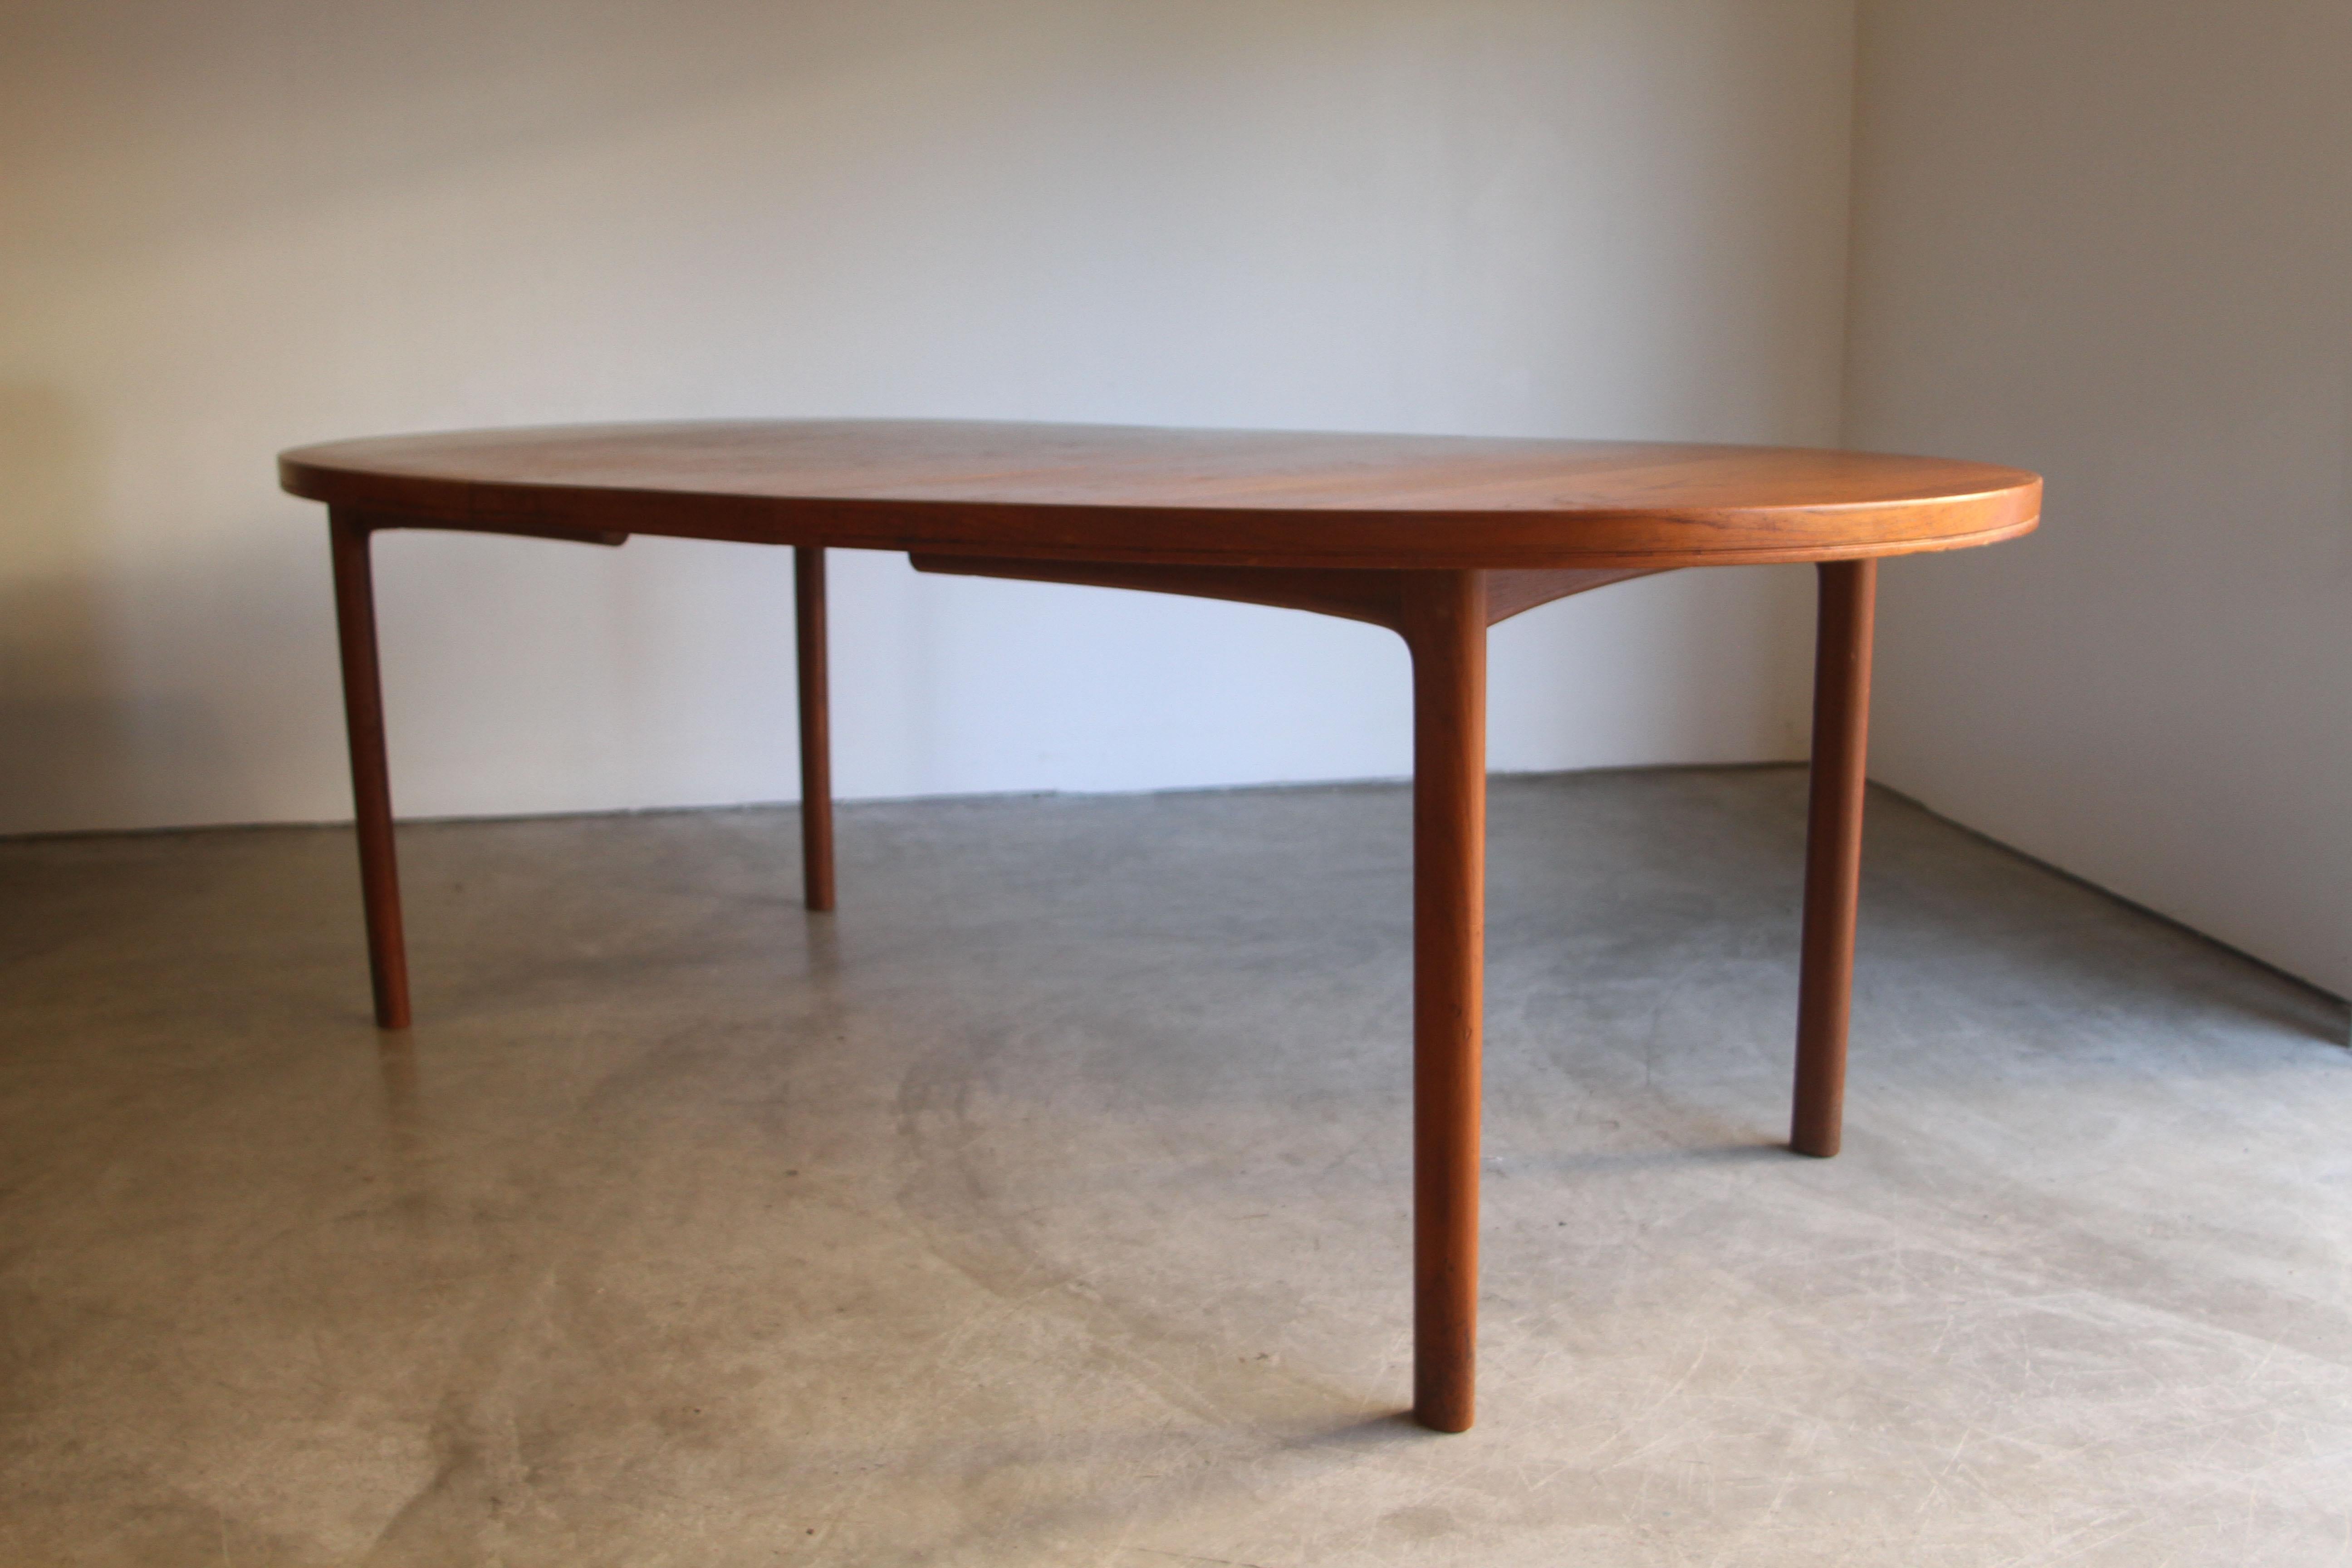 Swedish Midcentury Dining Table with 2 Leaves 1